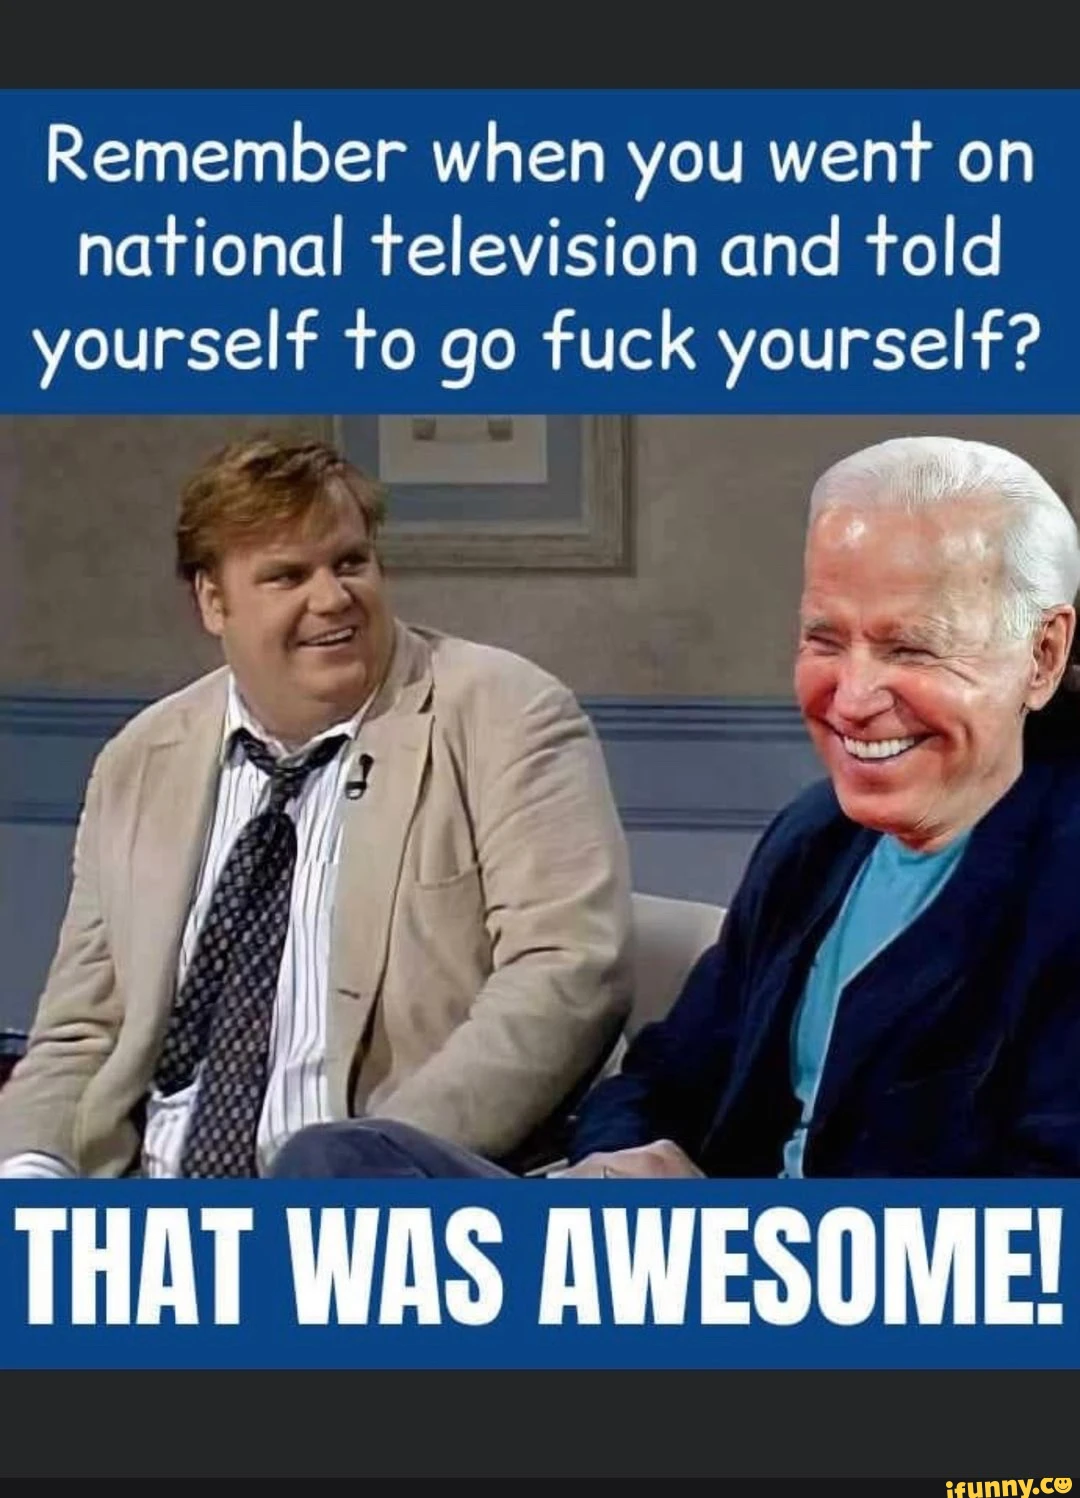 Remember when you went on national television and told yourself to go fuck yourself?
at
THAT WAS AWESOME!